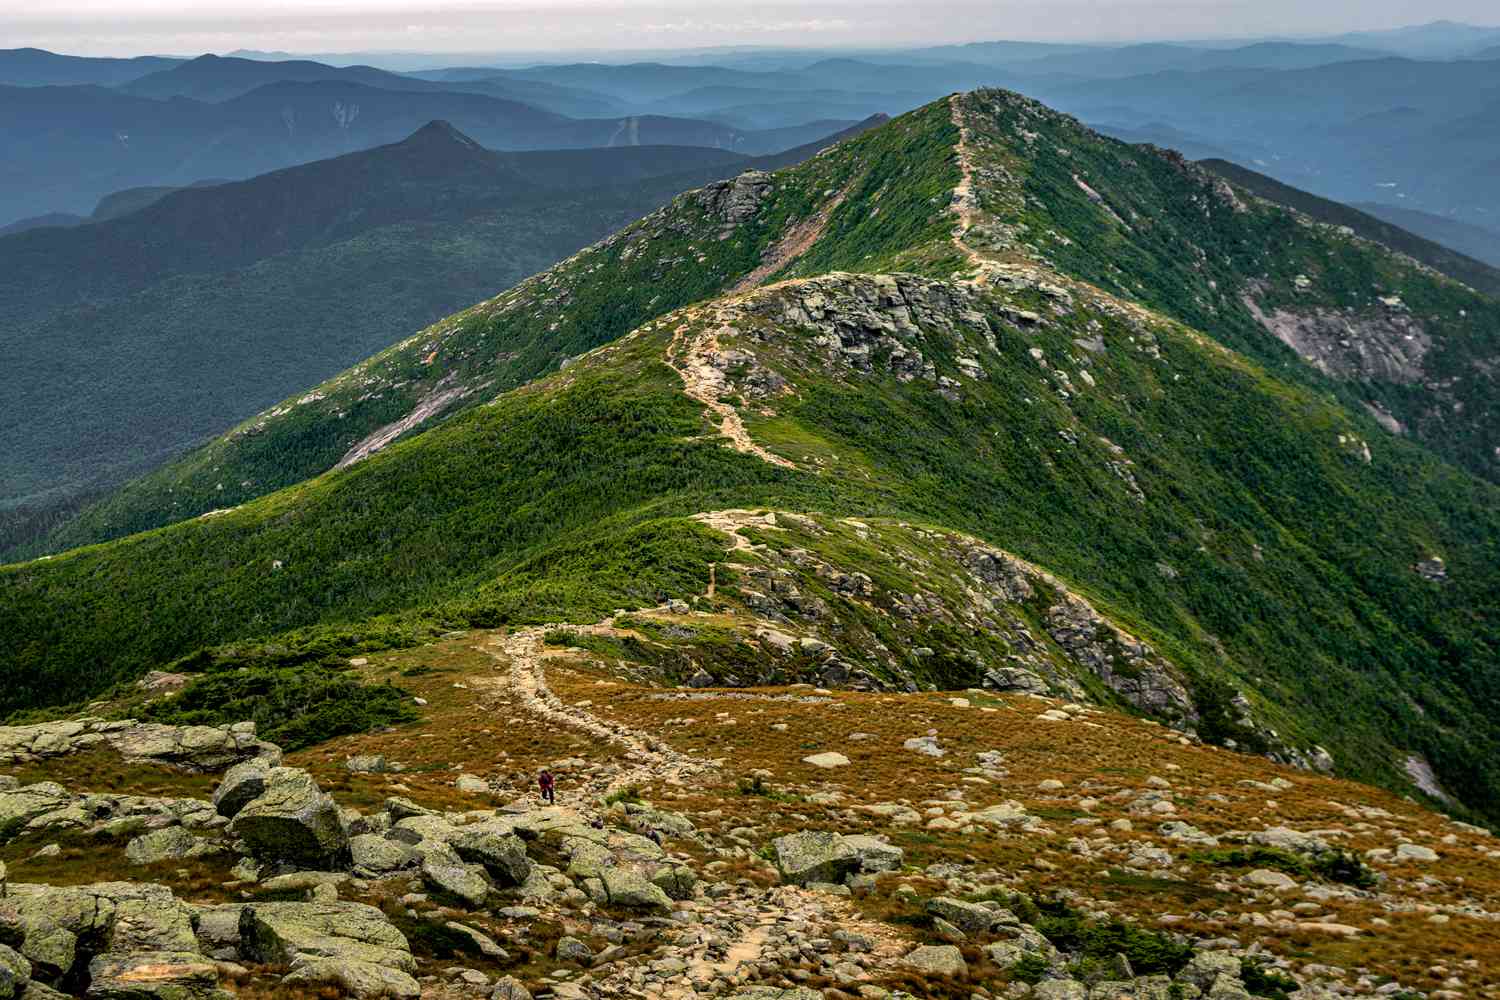 3 Teens Among Group of Hikers Rescued from N.H. Mountain Trail, Officials Say: 'Dangerous Decision'